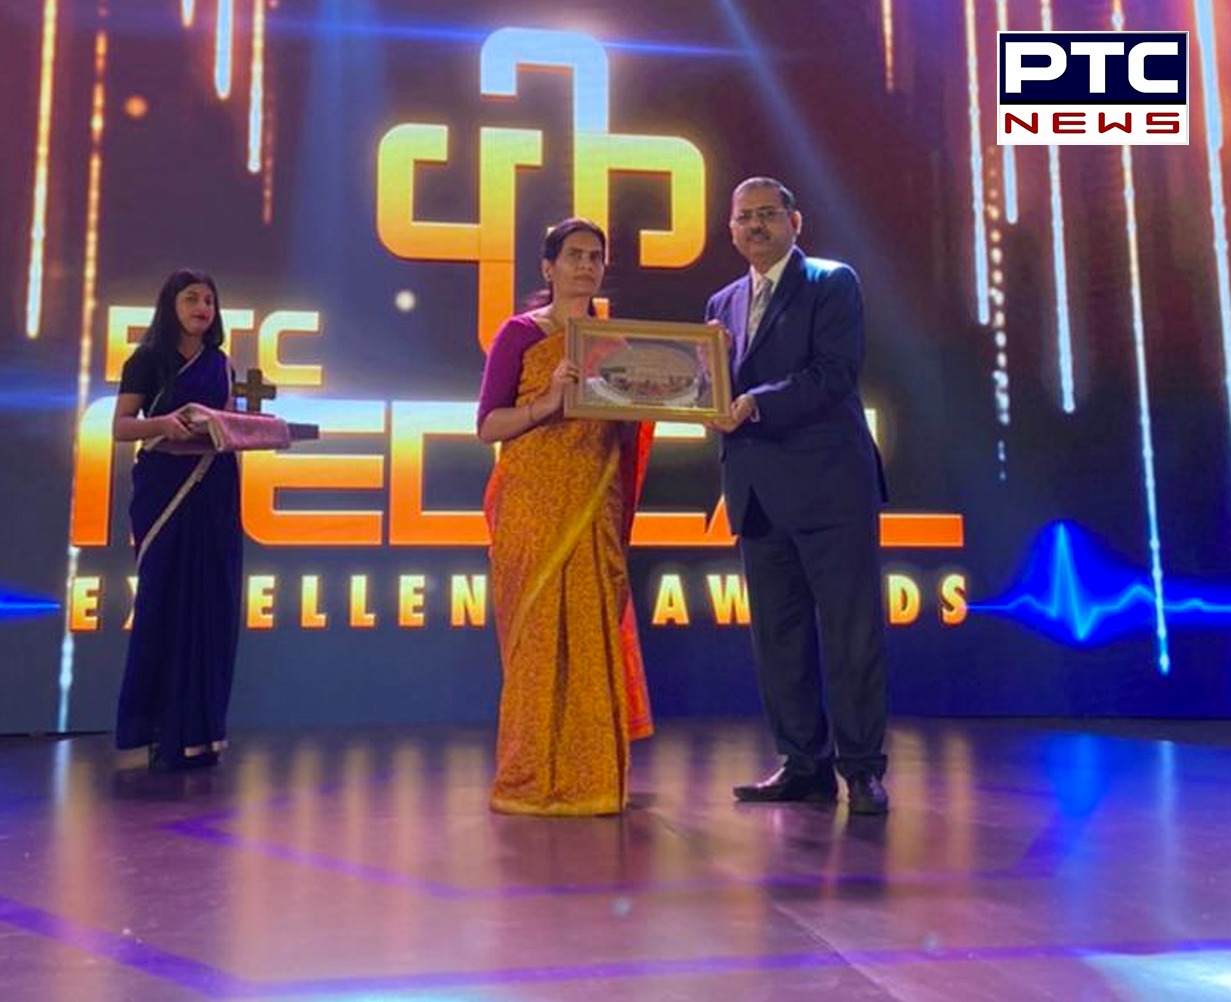 PTC Medical Excellence Awards: PTC News honours eminent medical professionals